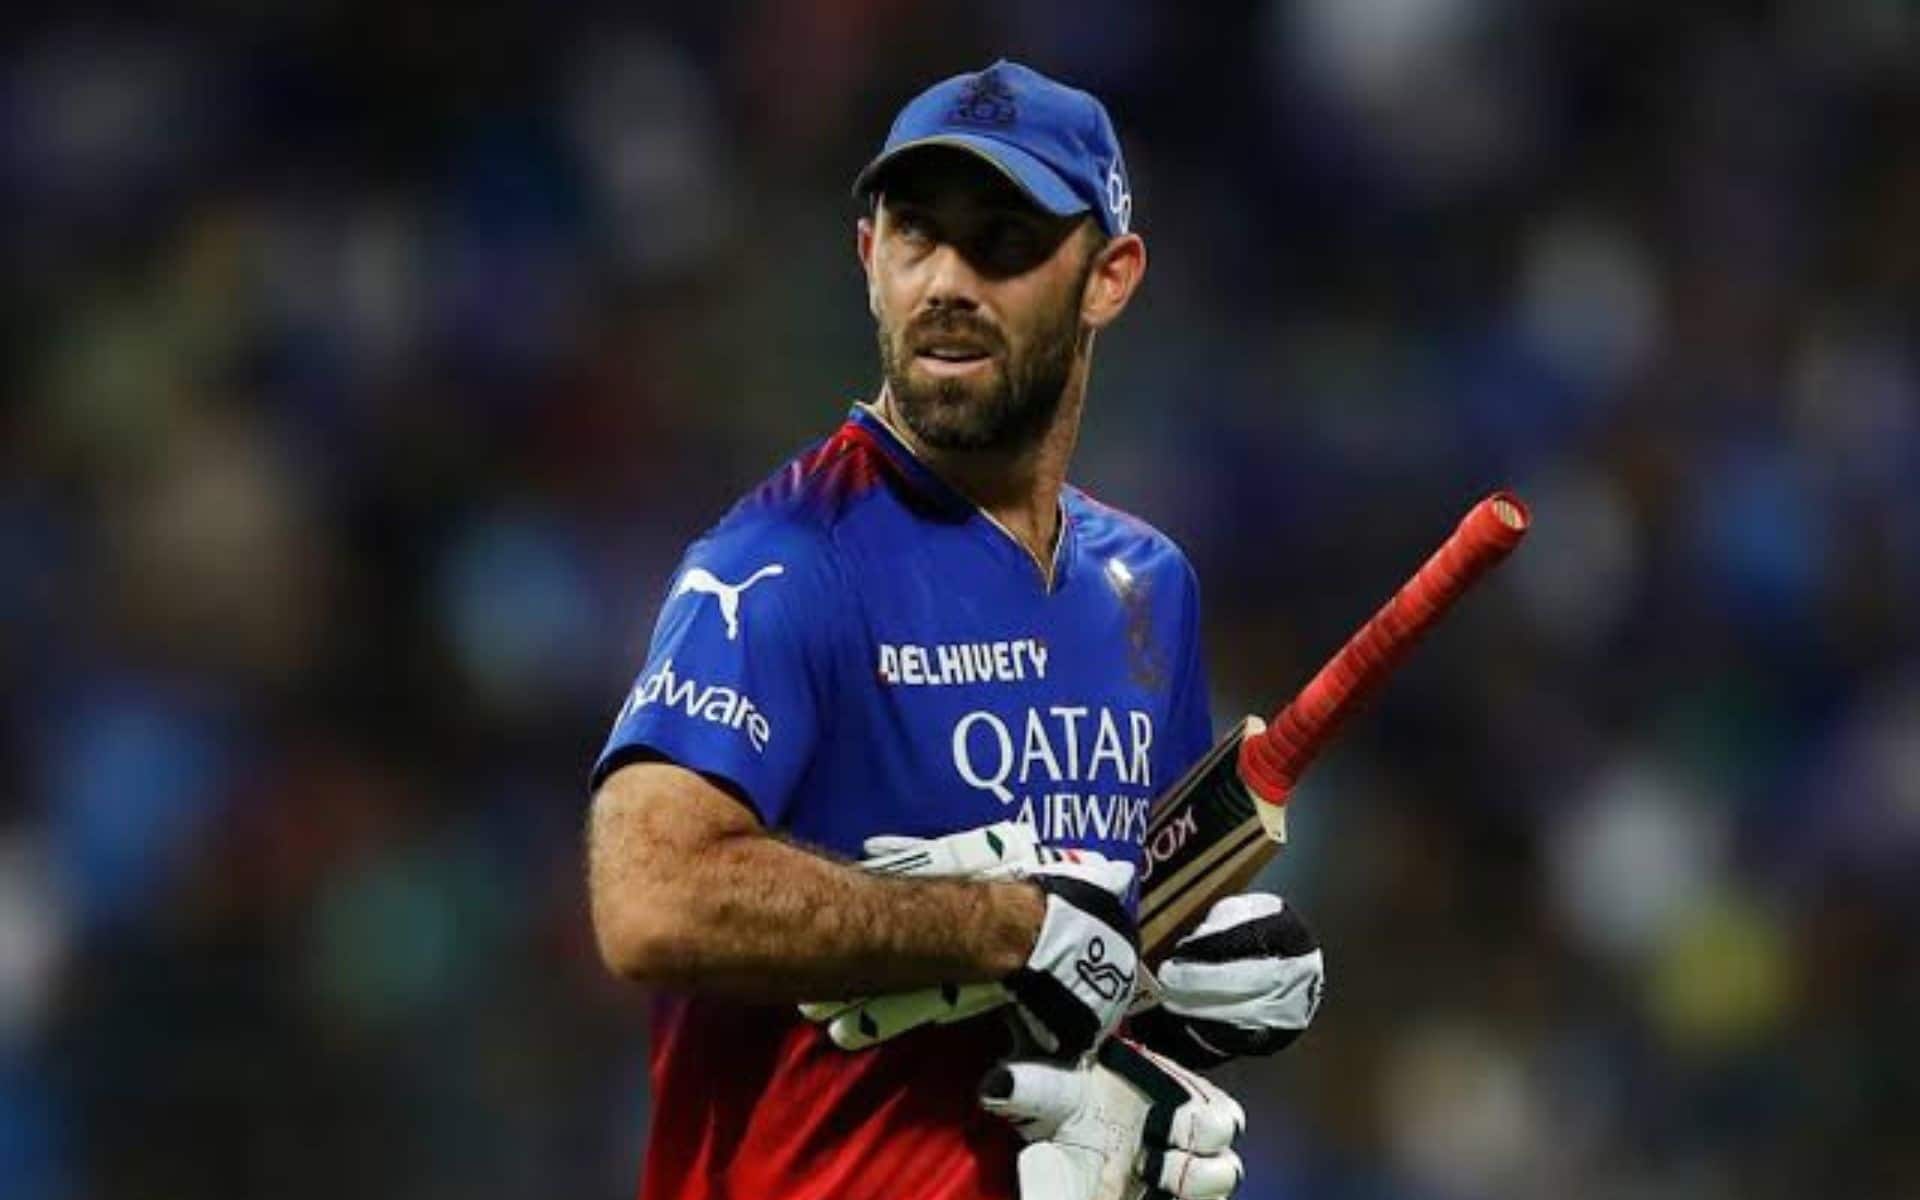 Glenn Maxwell brutally trolled after miserable performance (x)